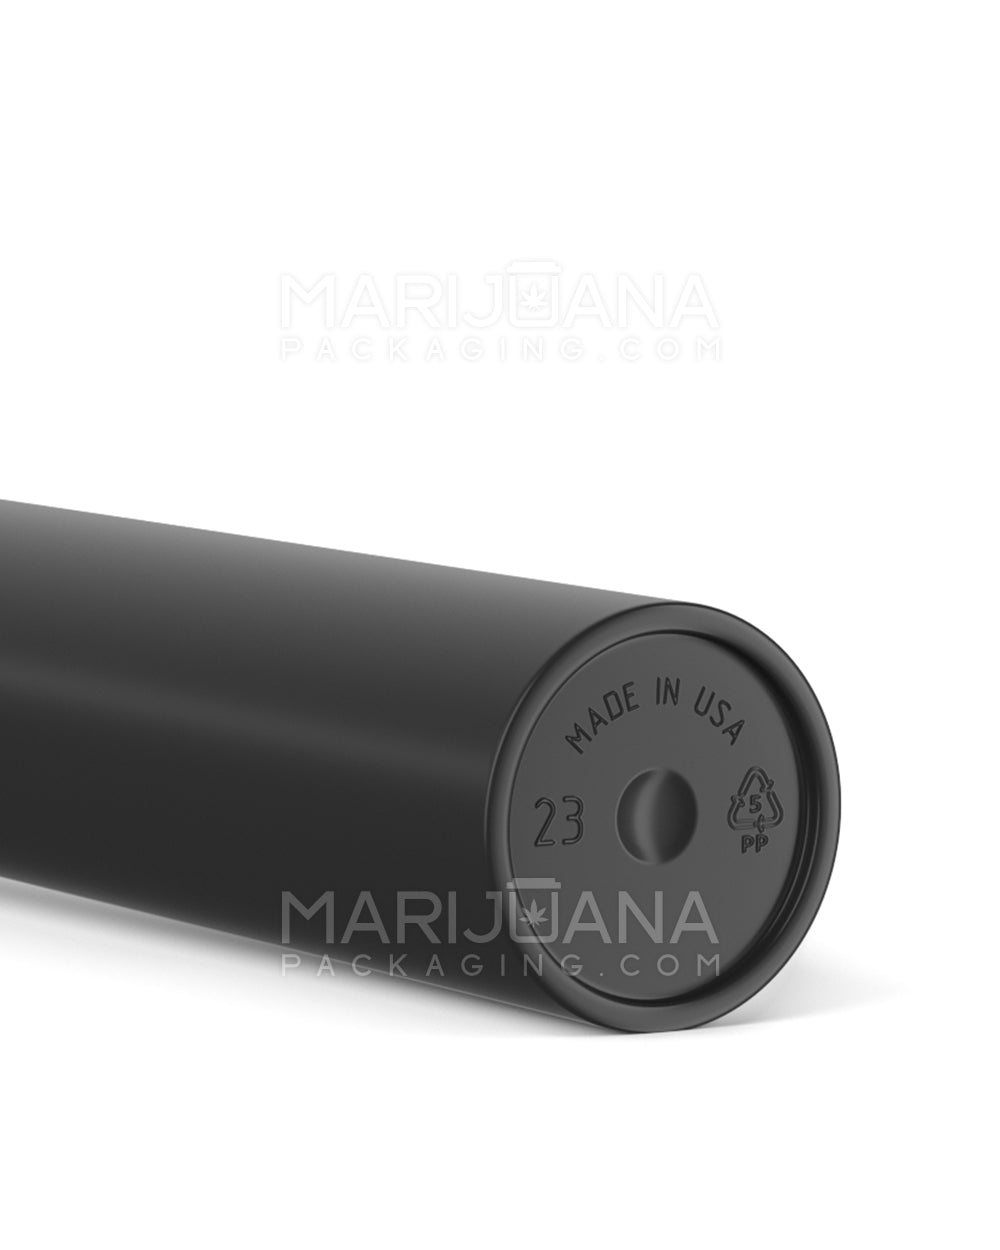 Child-Proof Joint / Blunt Tube Container Black 116mm - THC (Toronto Hemp  Company)